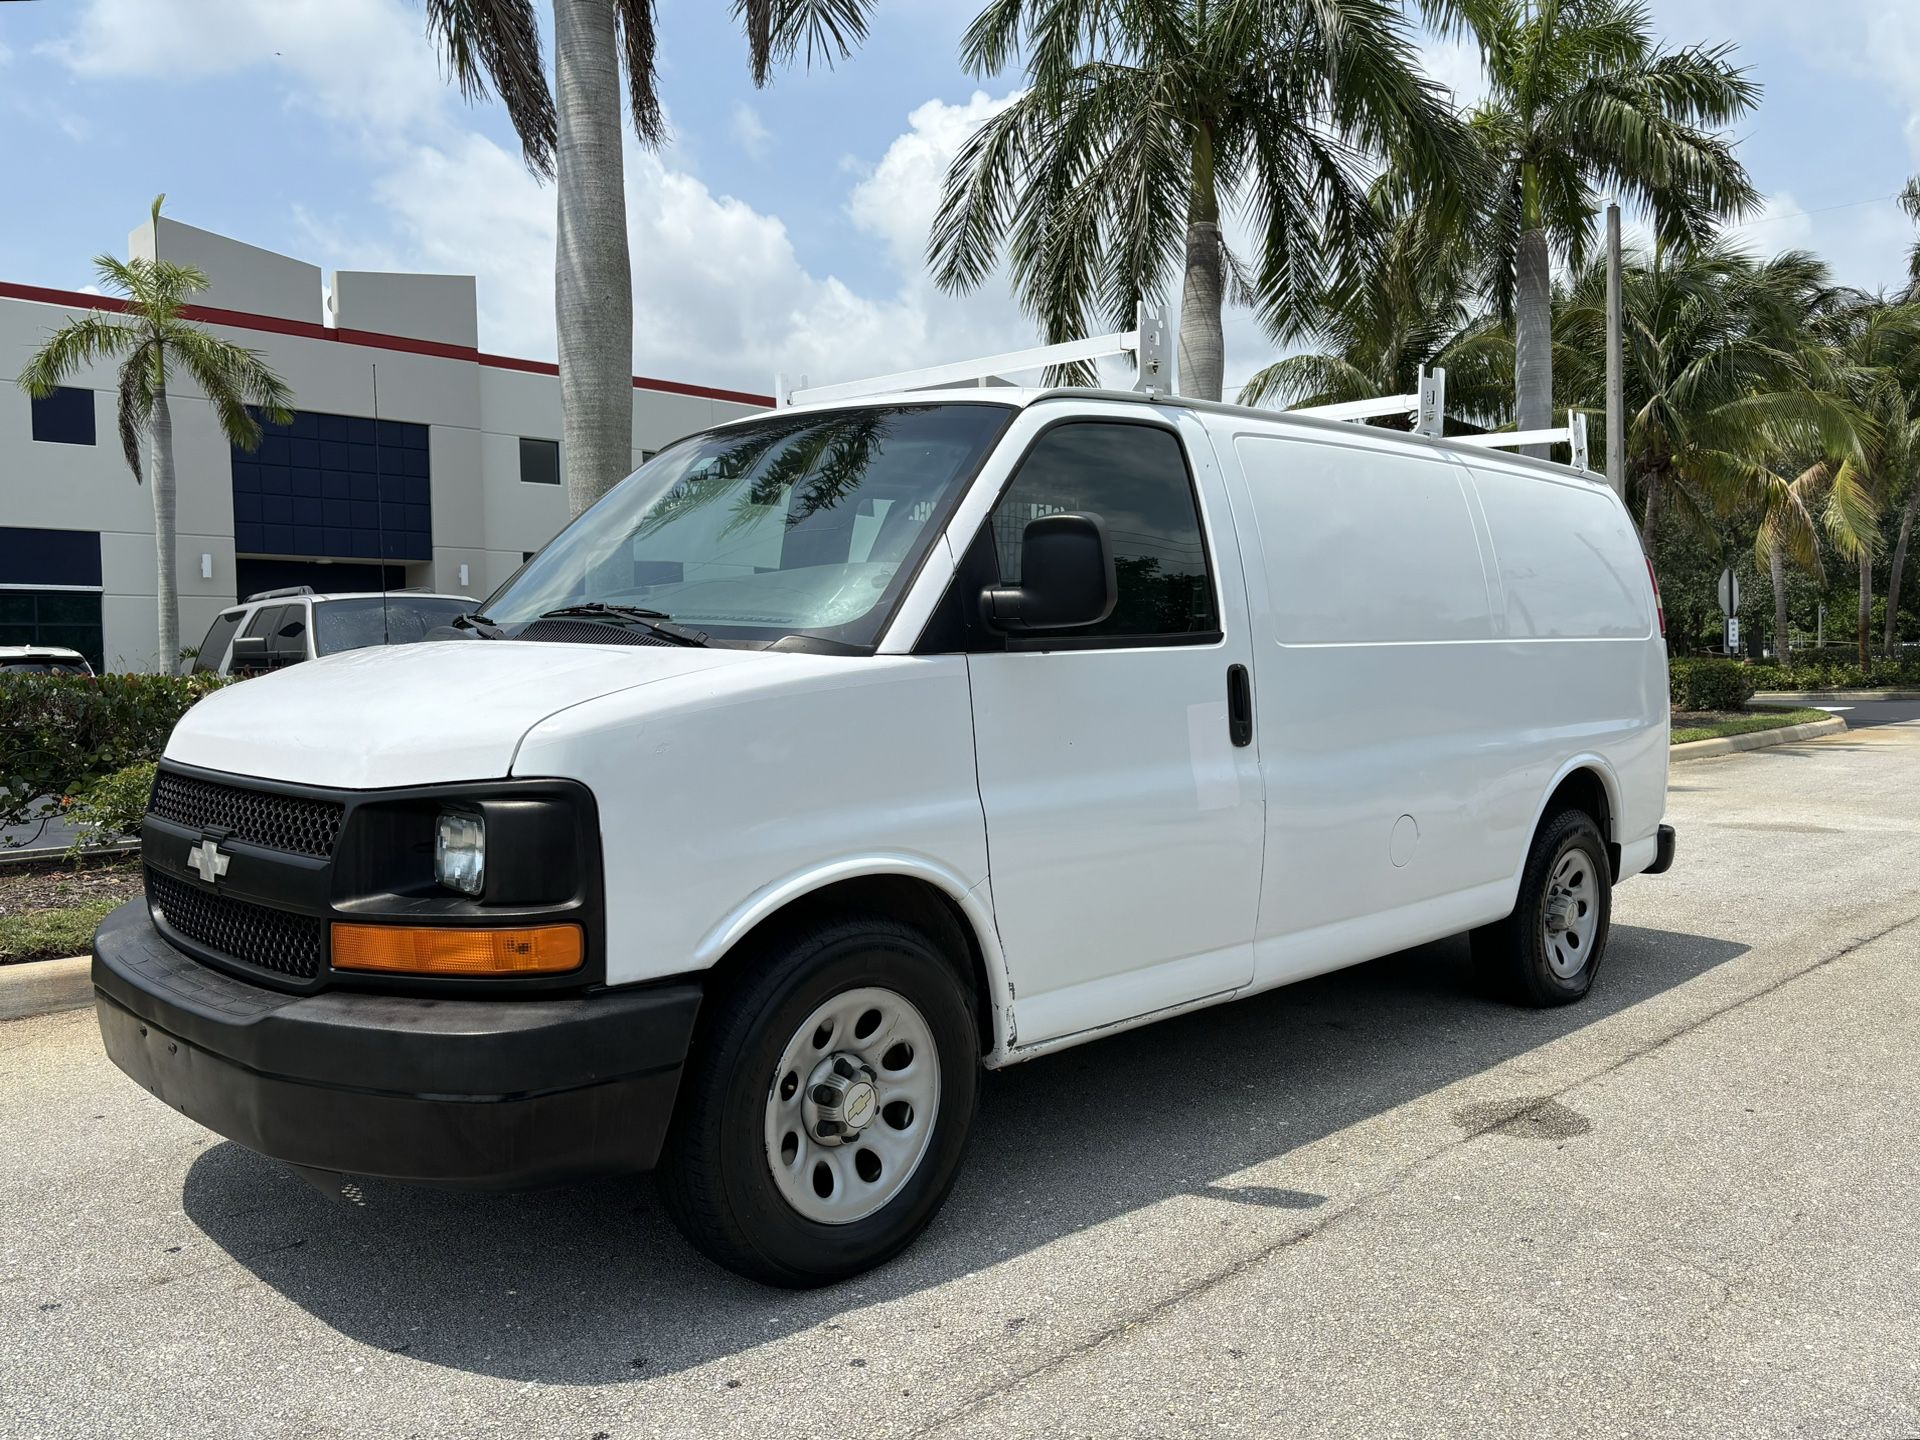 2010 Chevy Express Cargo Van Ready For Work 